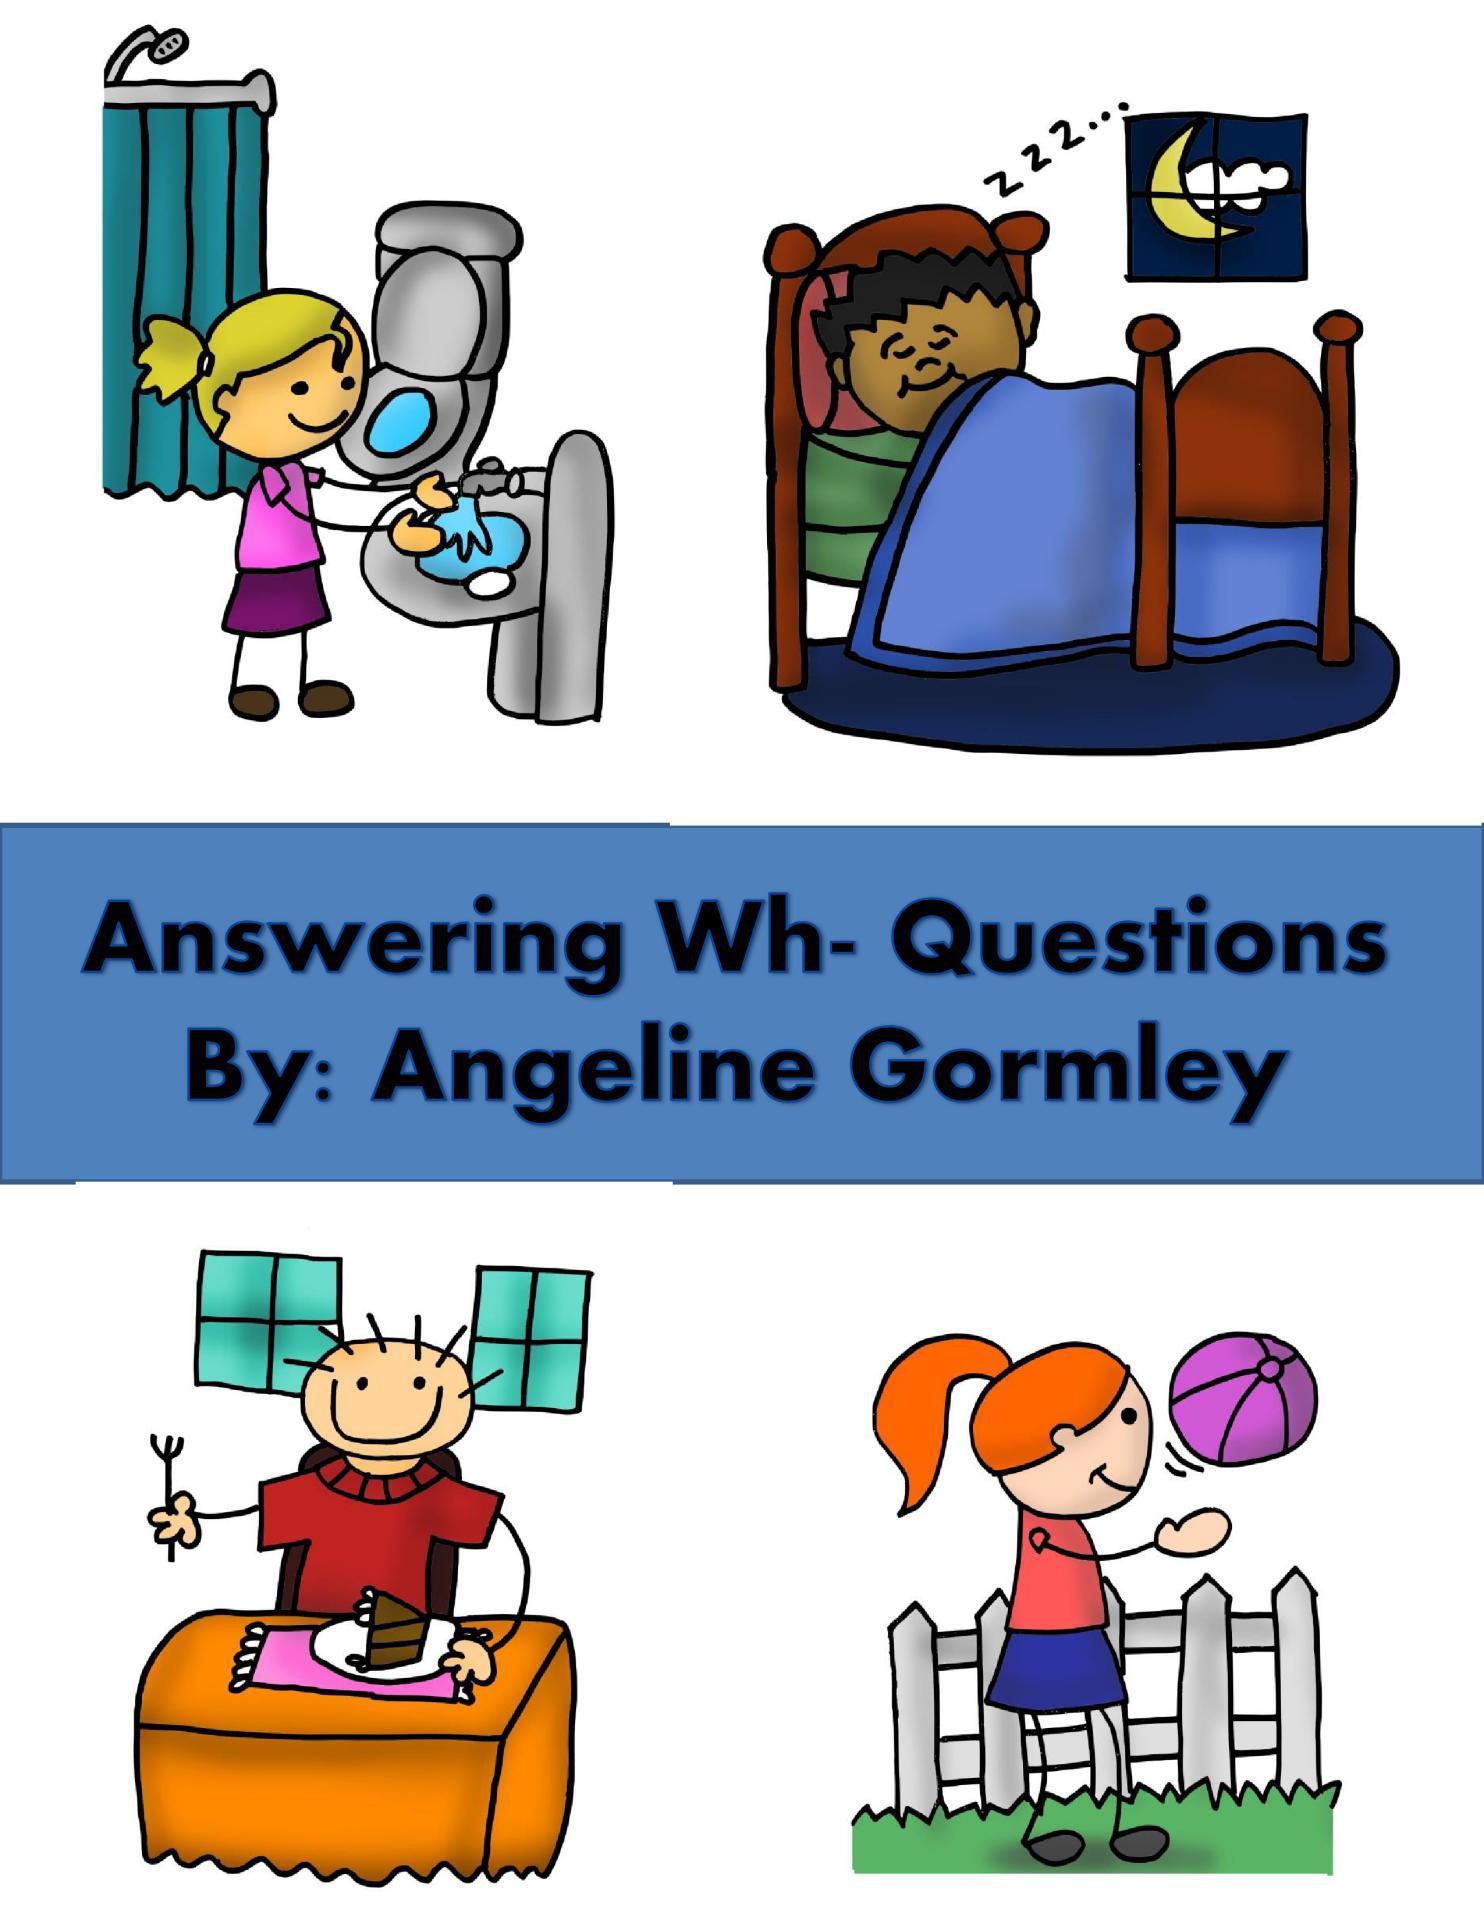 Wh- Questions for Children: Guide on helping your child answer who, what and where questions - Epub + Converted PDF